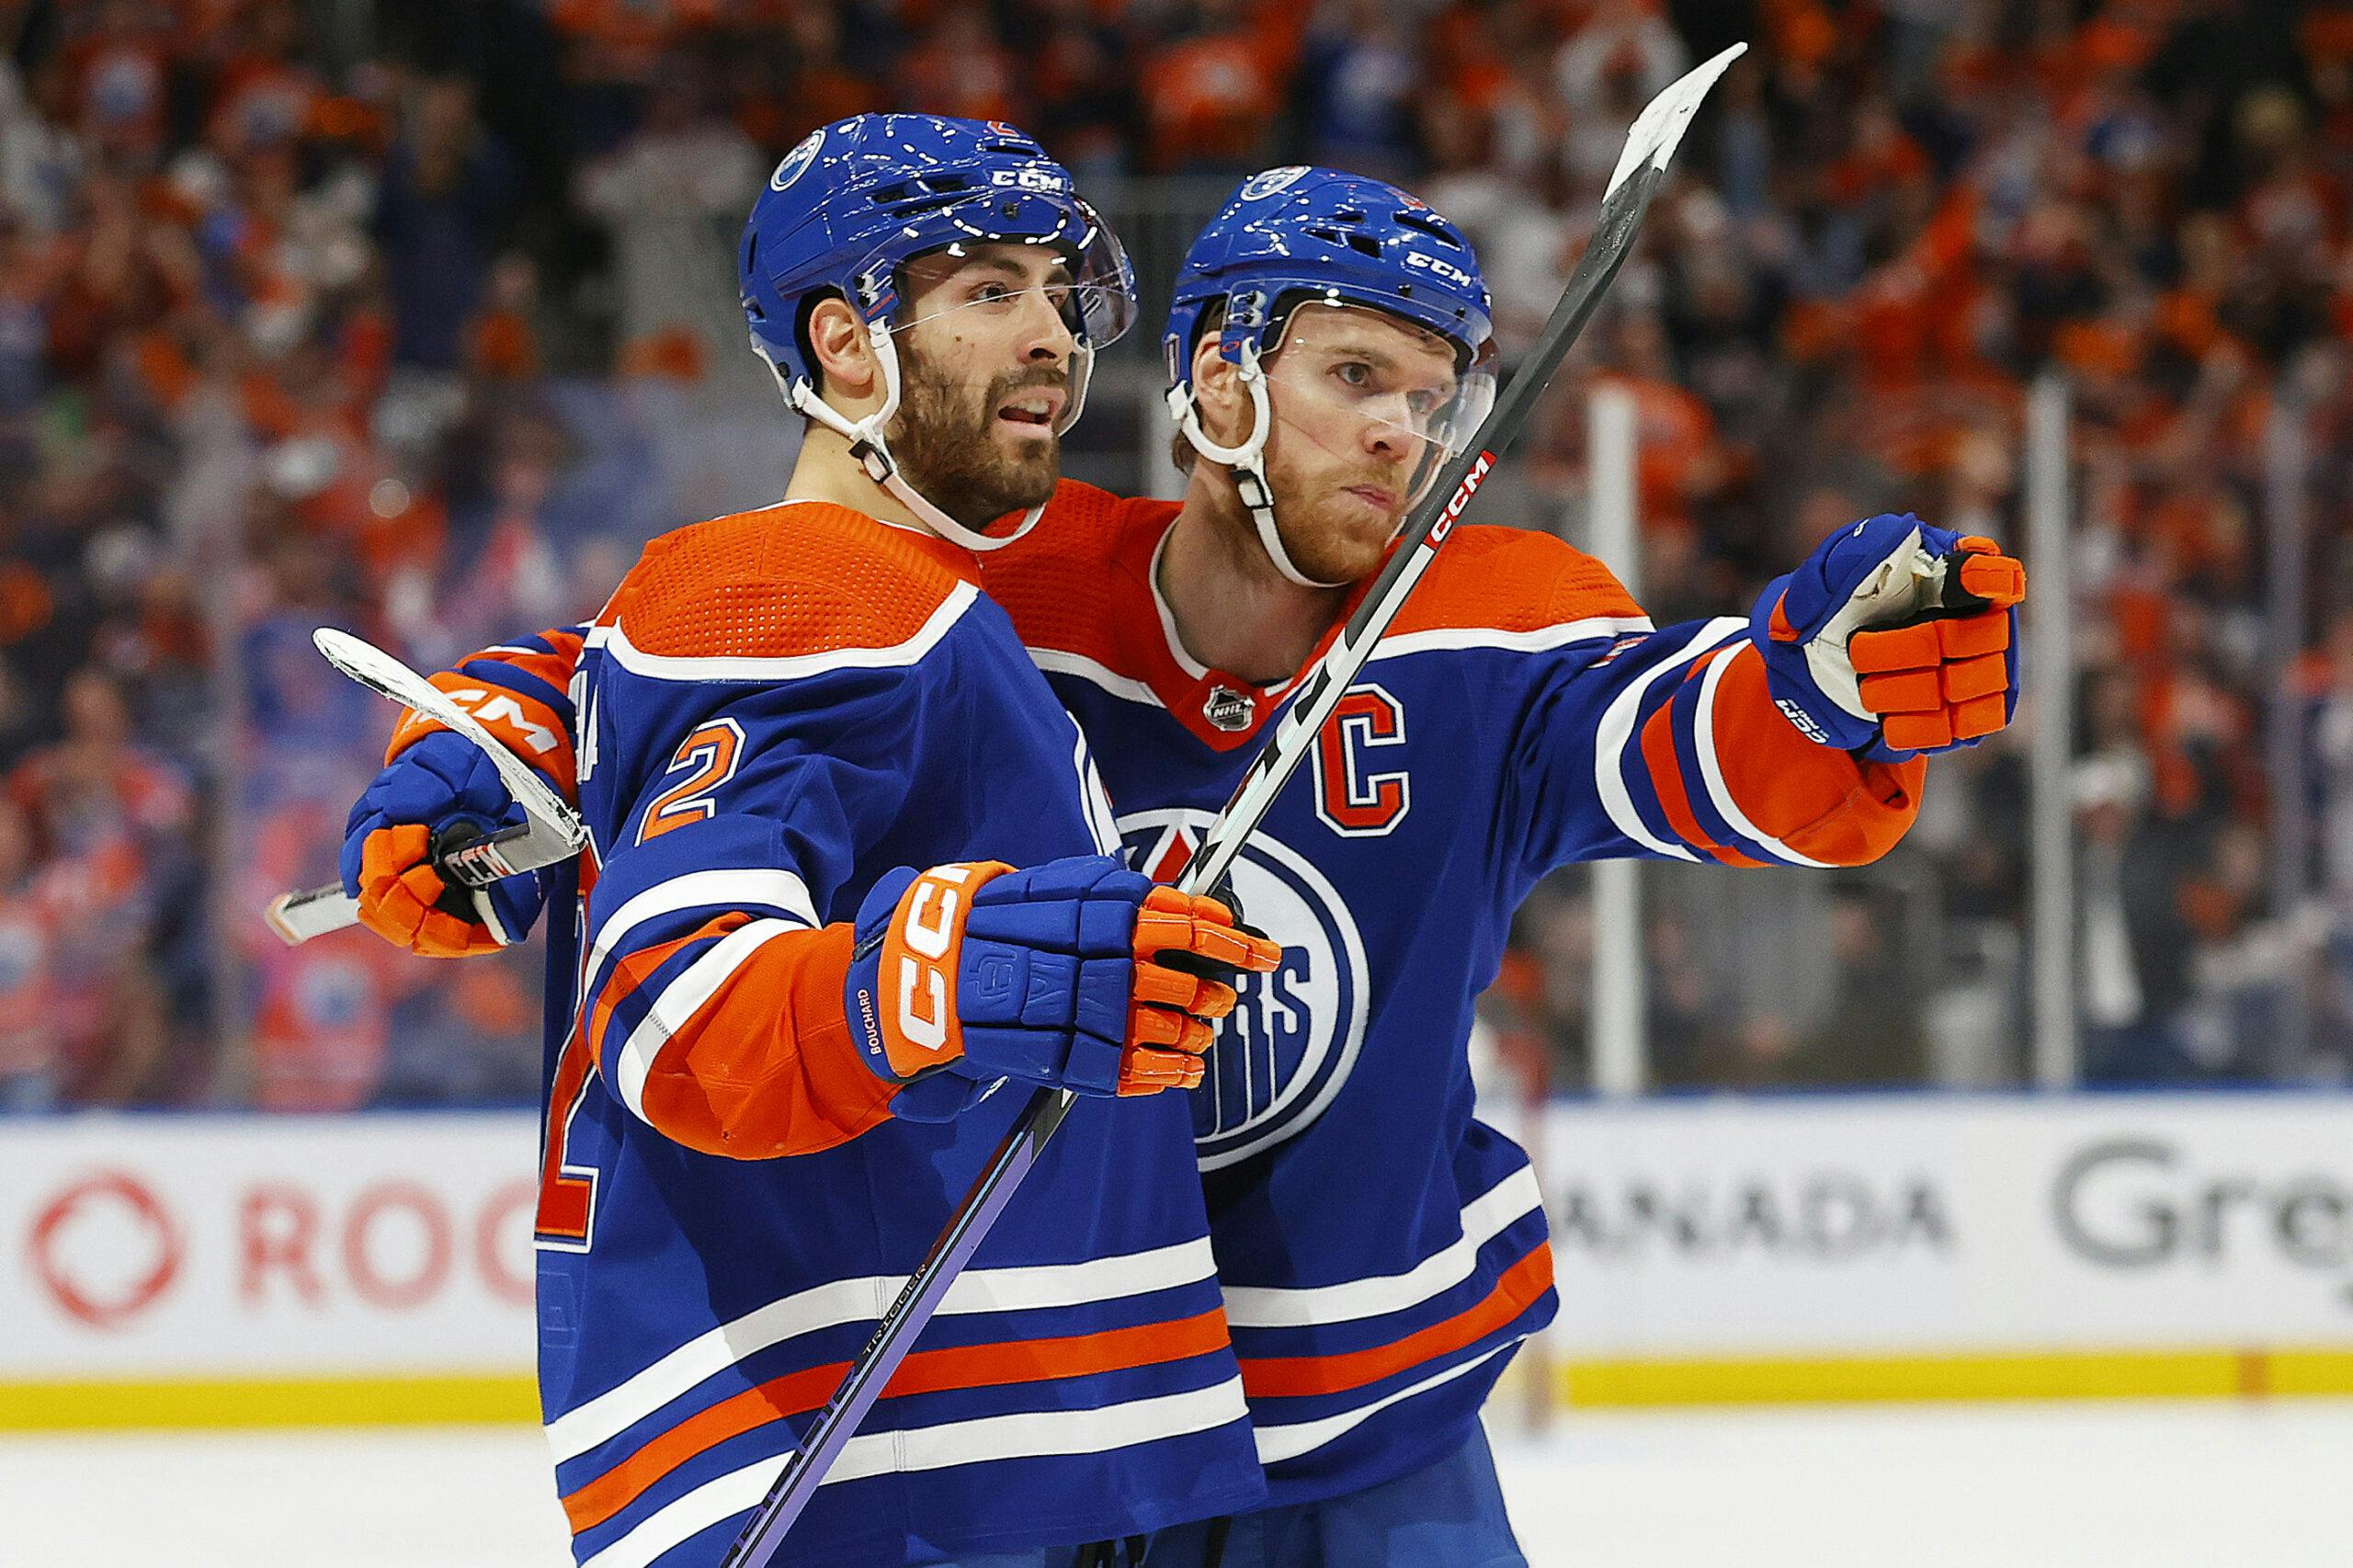 Oilers Foegele thriving in top 6 role - The Hockey News Edmonton Oilers  News, Analysis and More